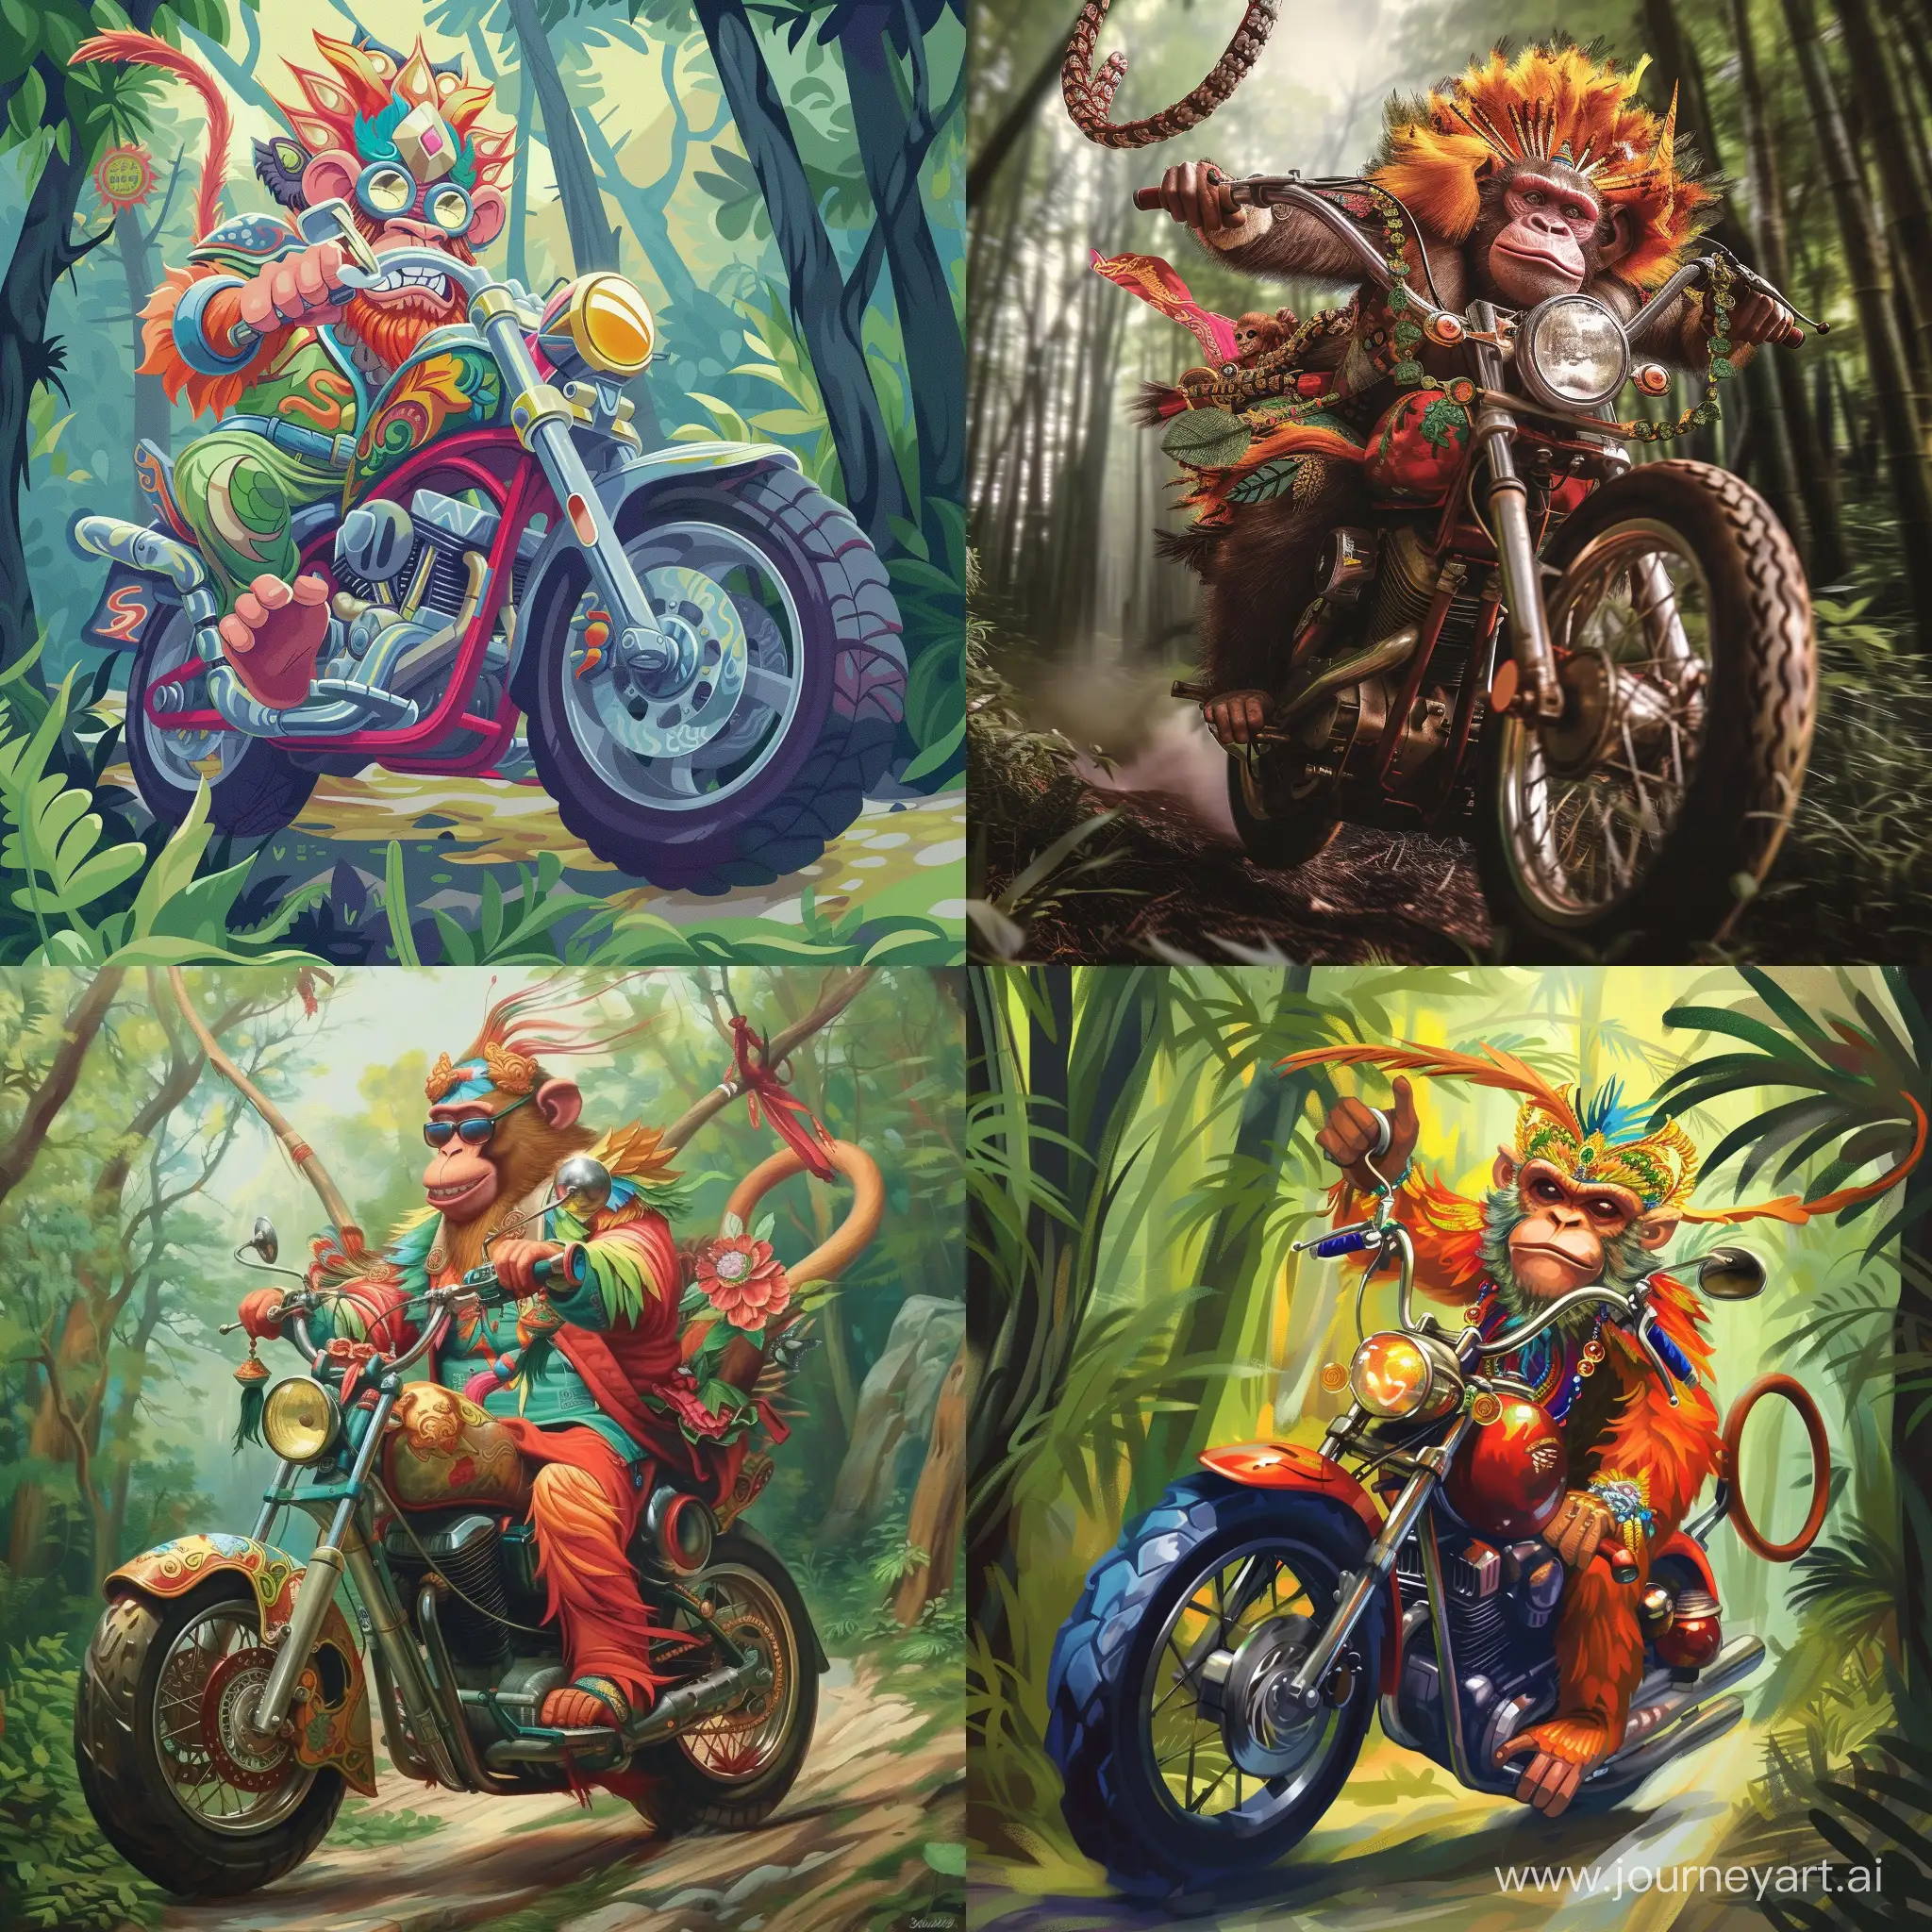 Colorful-Monkey-King-Riding-Motorcycle-in-Enchanted-Forest